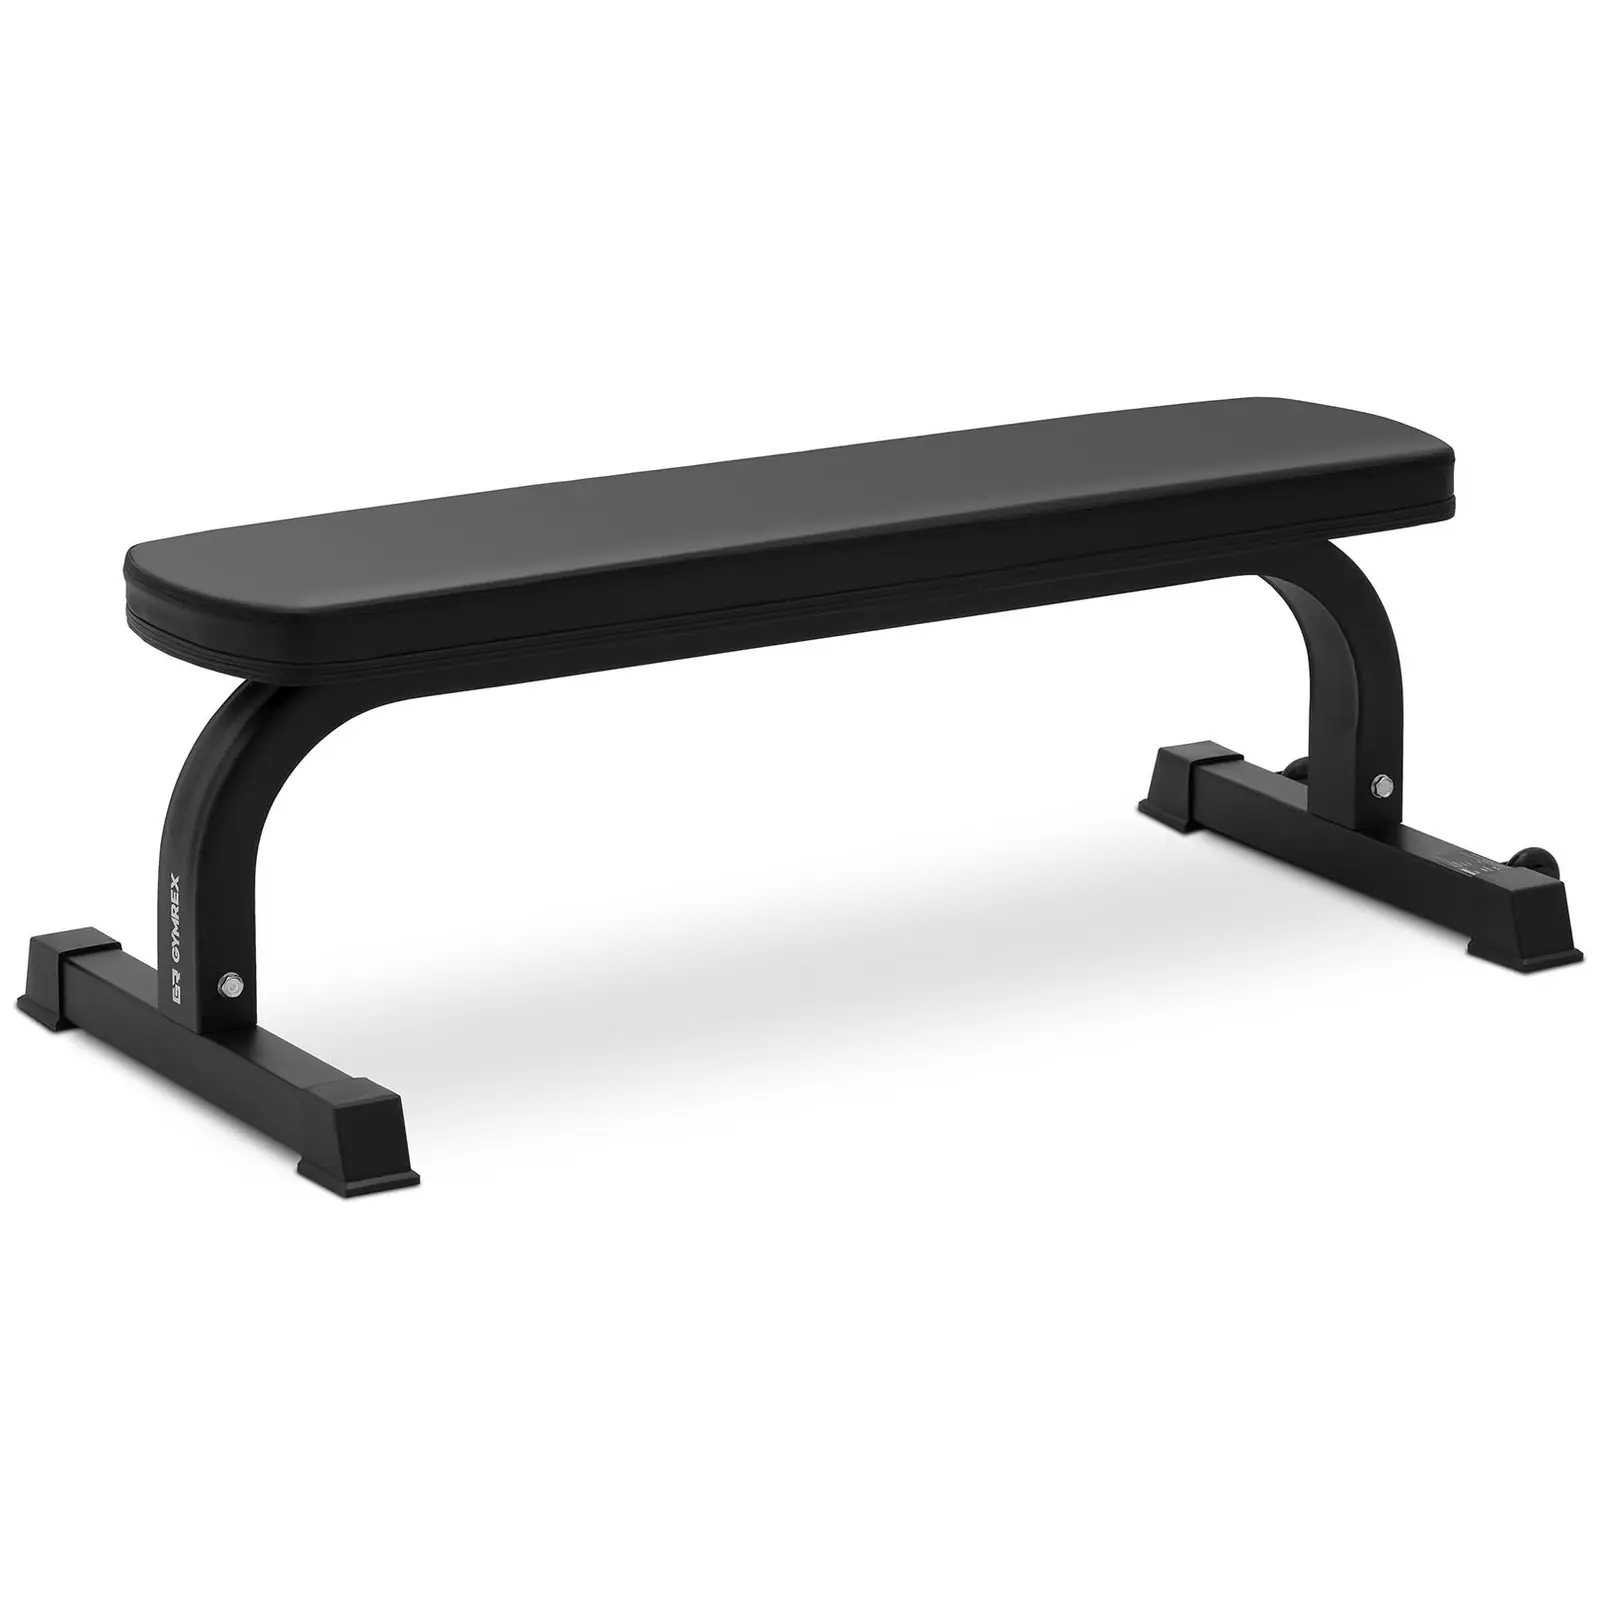 Flat Bench - up to 150 kg - 1110 x 285 mm